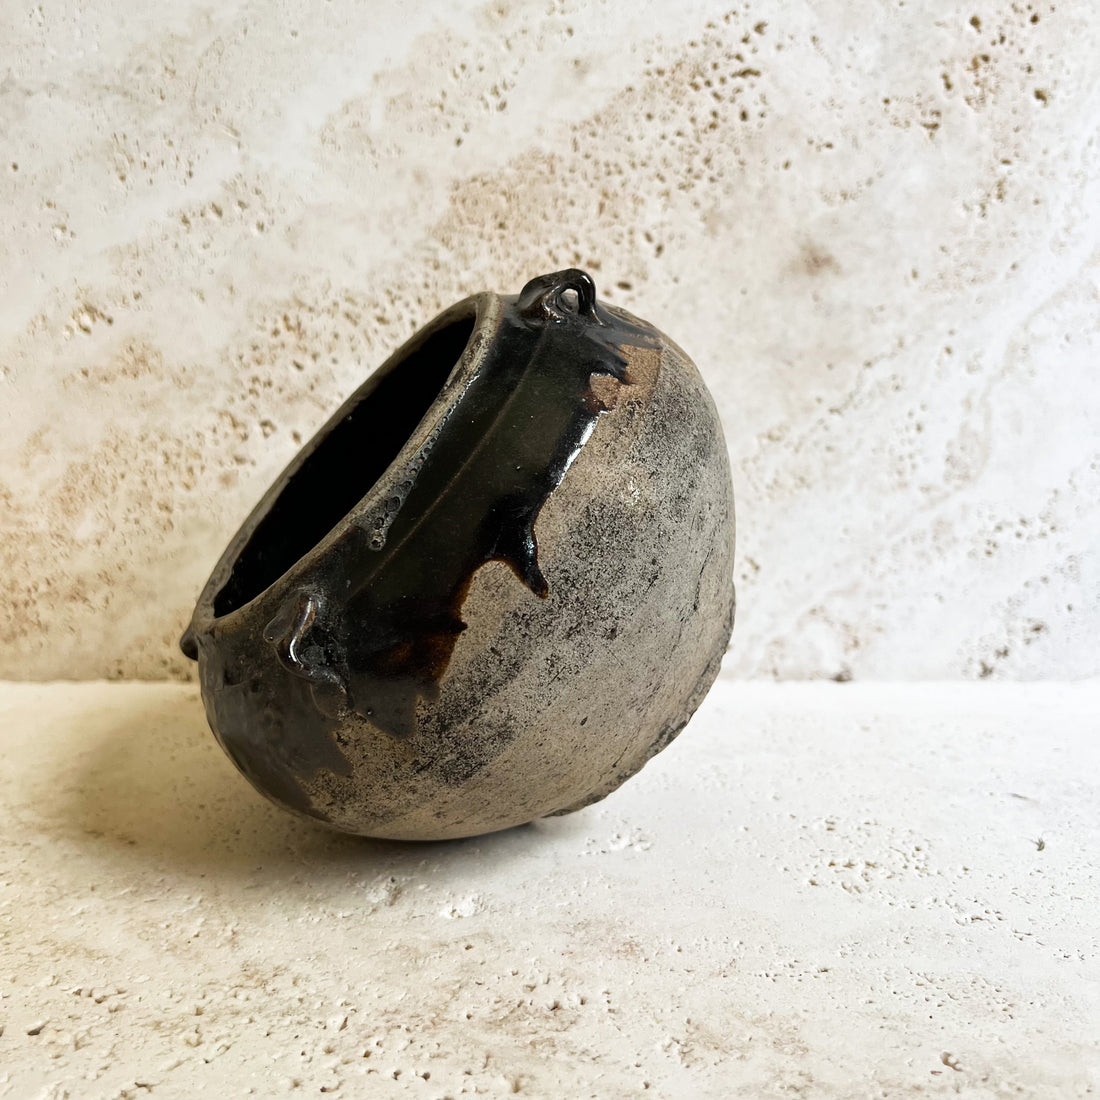 Antique brown Chinese pot filled with dried white German statice florals. The pot sits on a travertine stone.